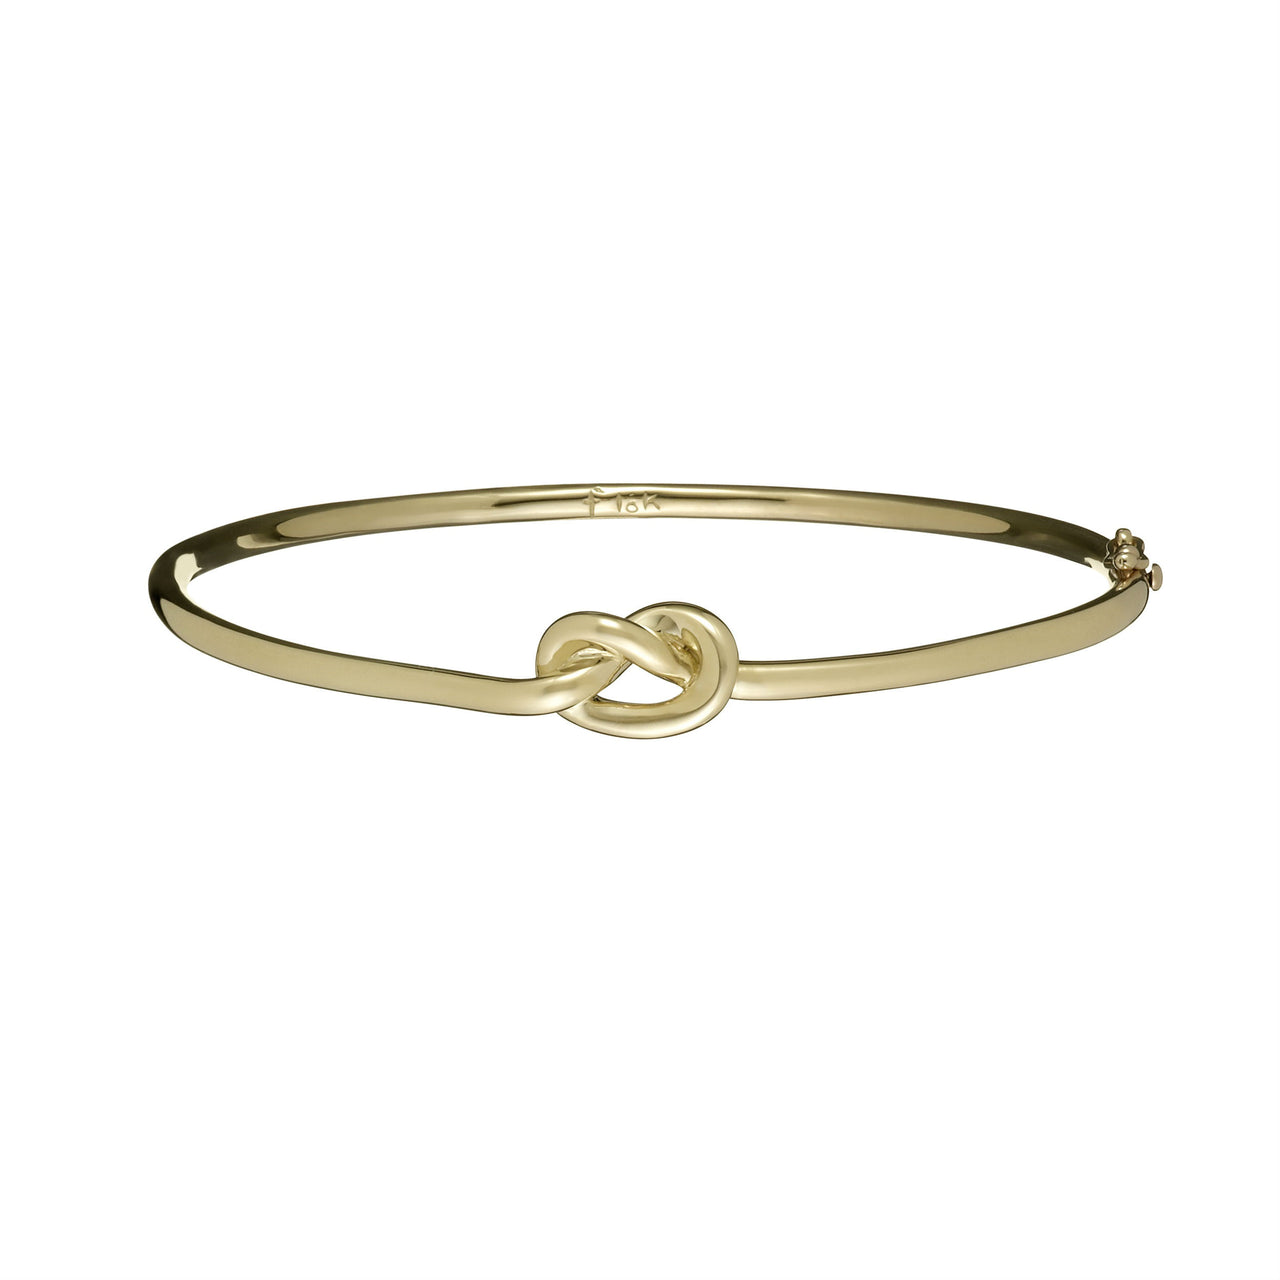 18k yellow gold love knot bangle by Finn by Candice Pool Neistat perfect for Valentines Day